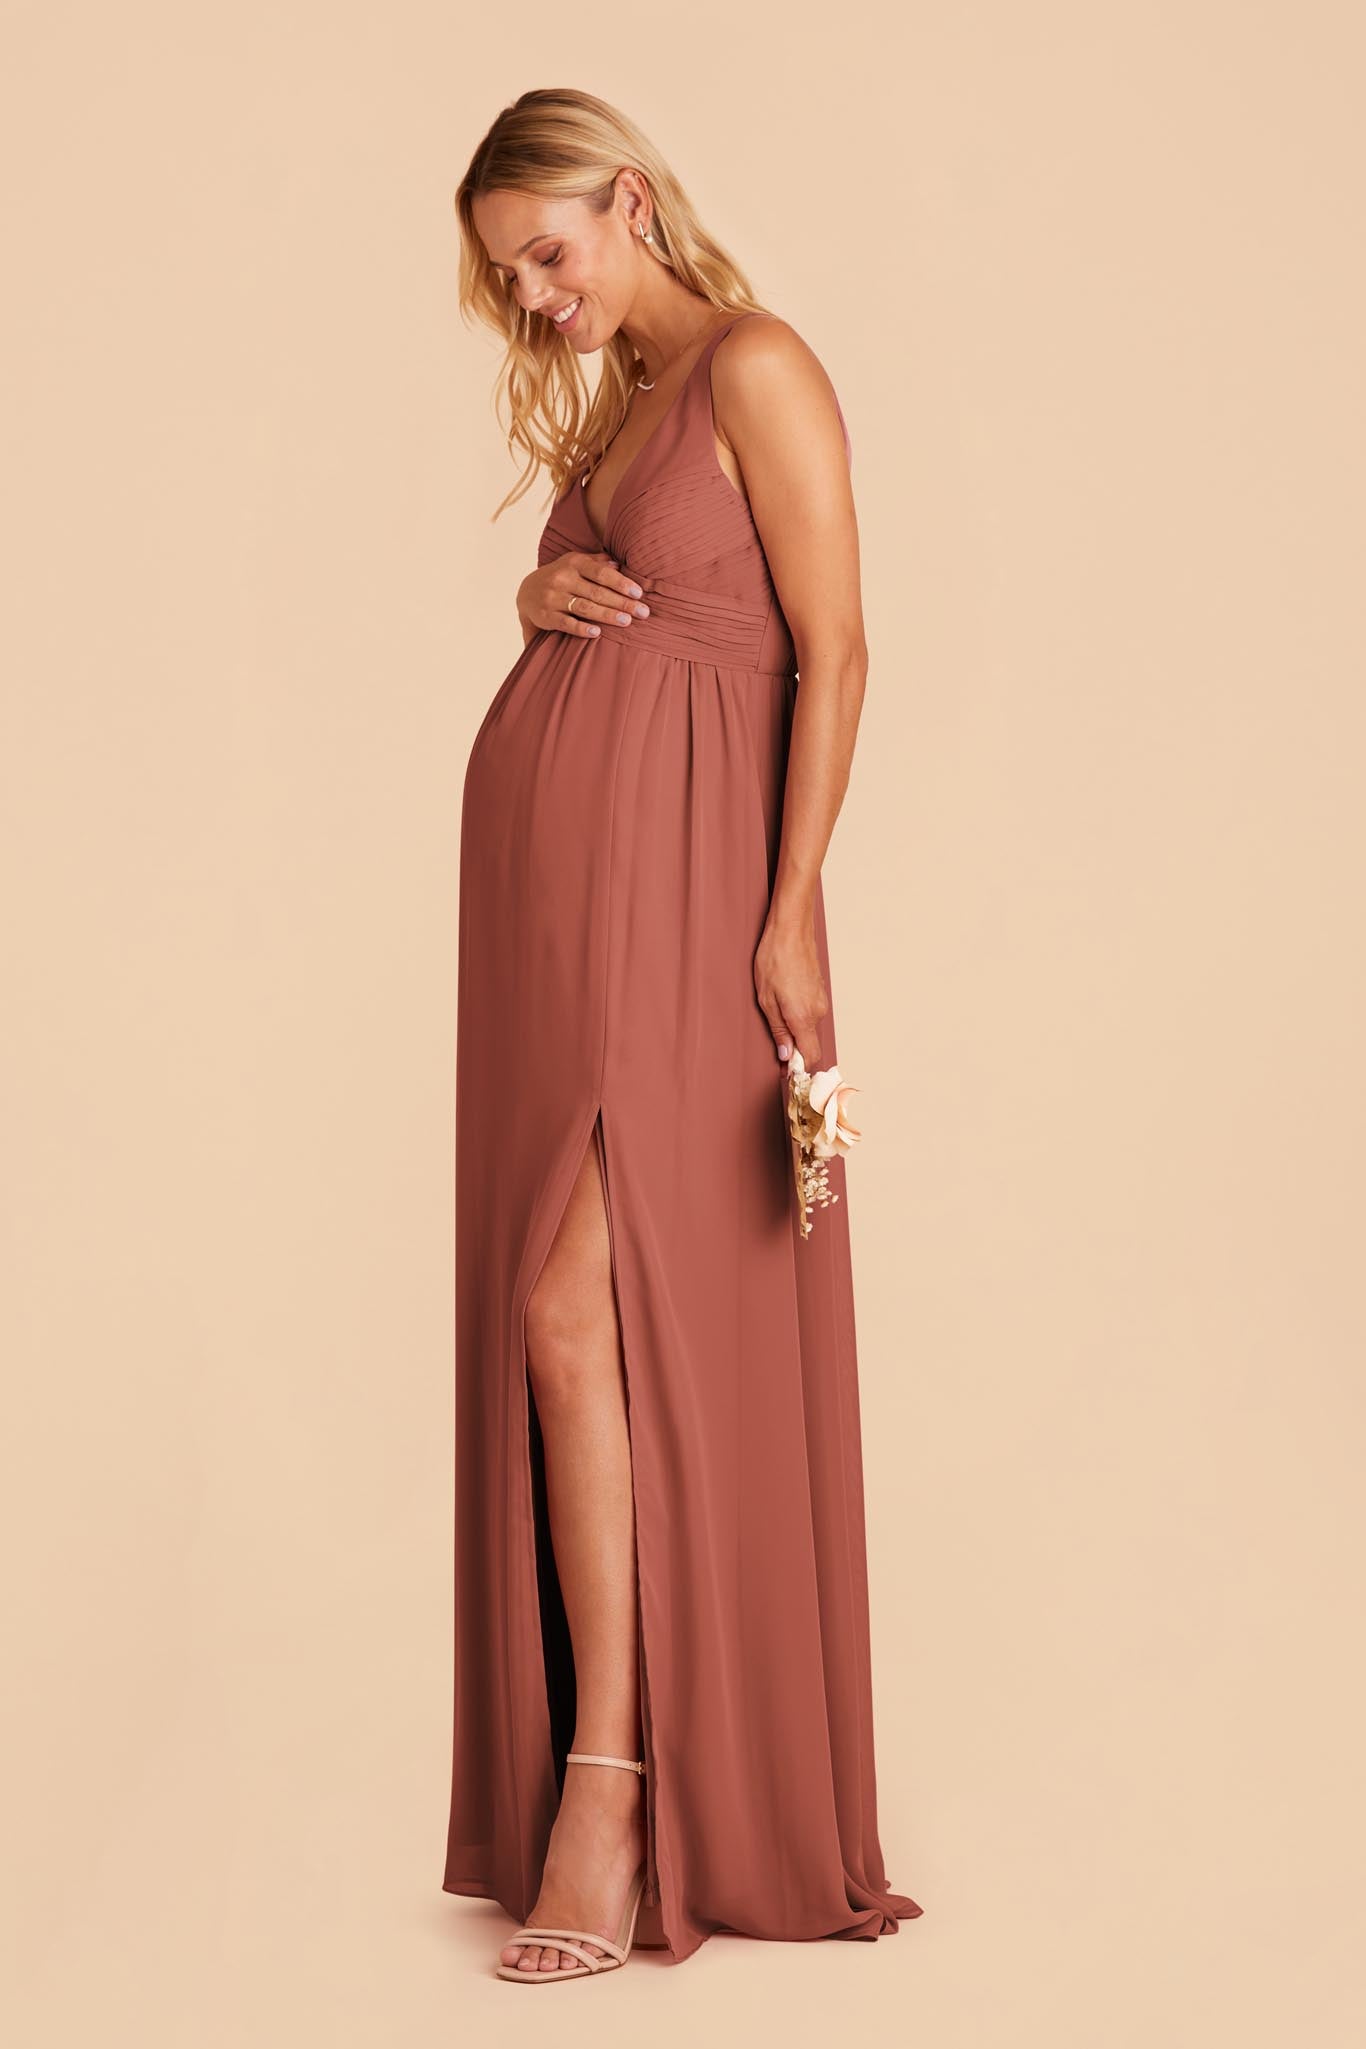 Desert Rose Laurie Empire Dress by Birdy Grey